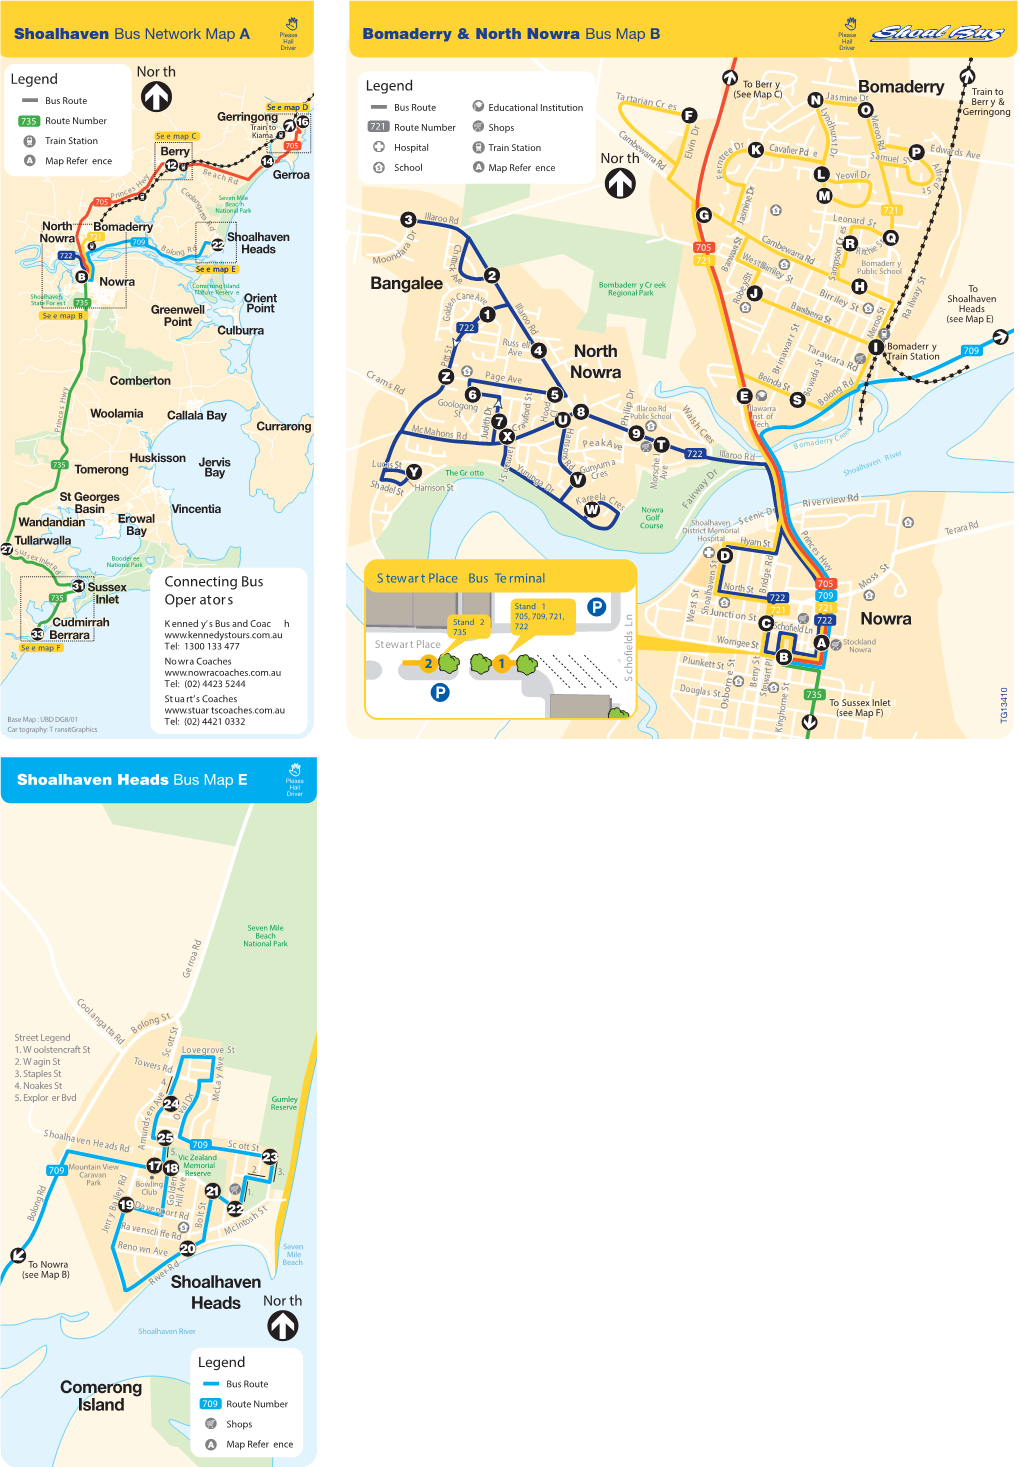 Bomaderry & North Nowra Bus Map B Shoalhaven Bus